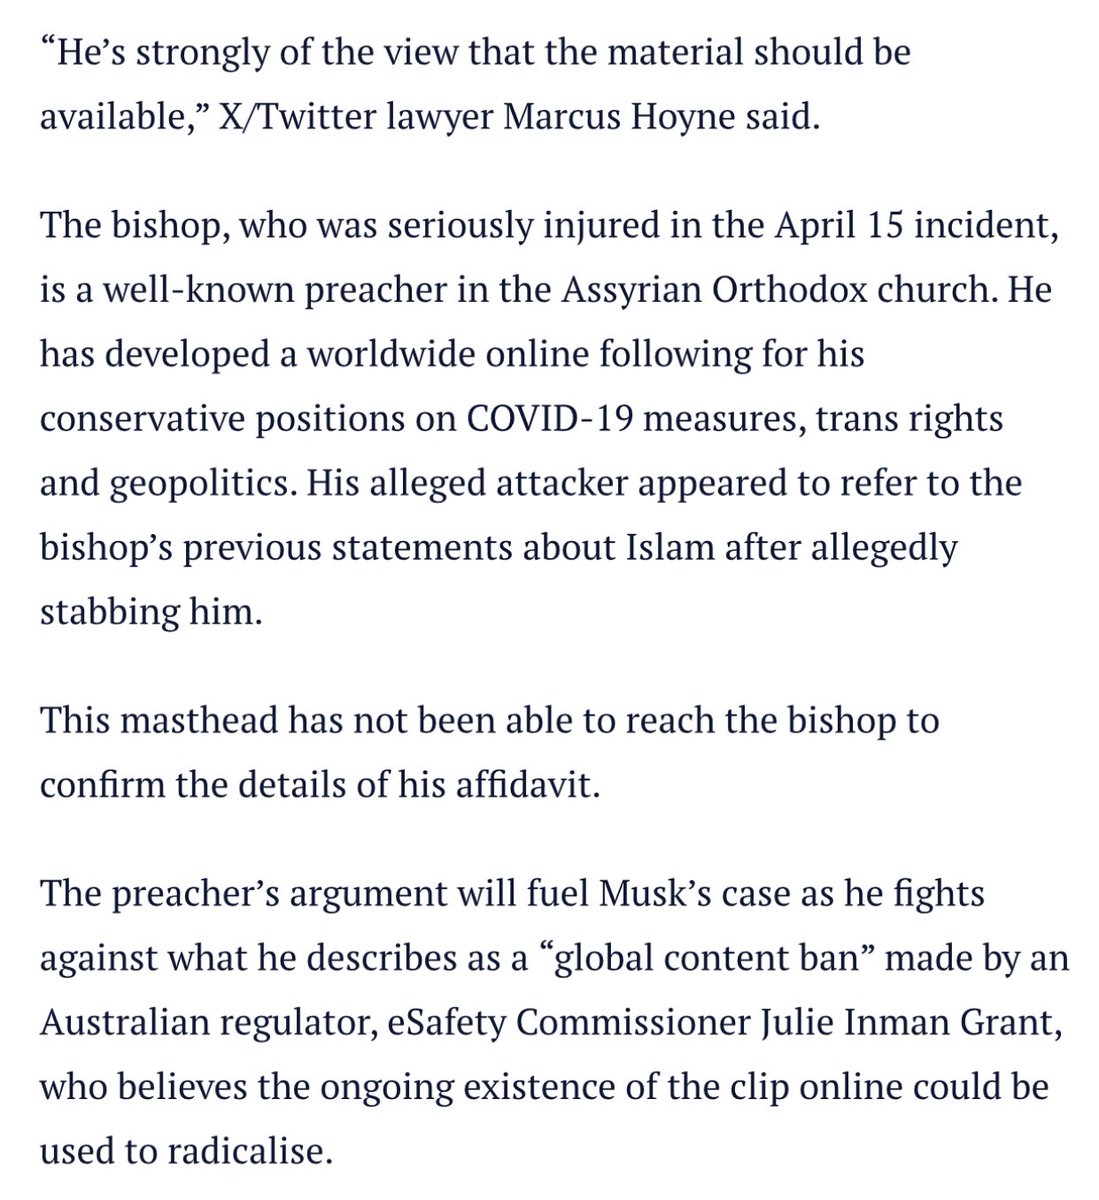 According to Paul Sakkal of the Sydney Morning Herald, Bishop Mar Mari Emmanuel has backed Elon Musk in his battle for free speech, saying he thinks the video of his stabbing shouldn’t be censored. archive.ph/UxIWq